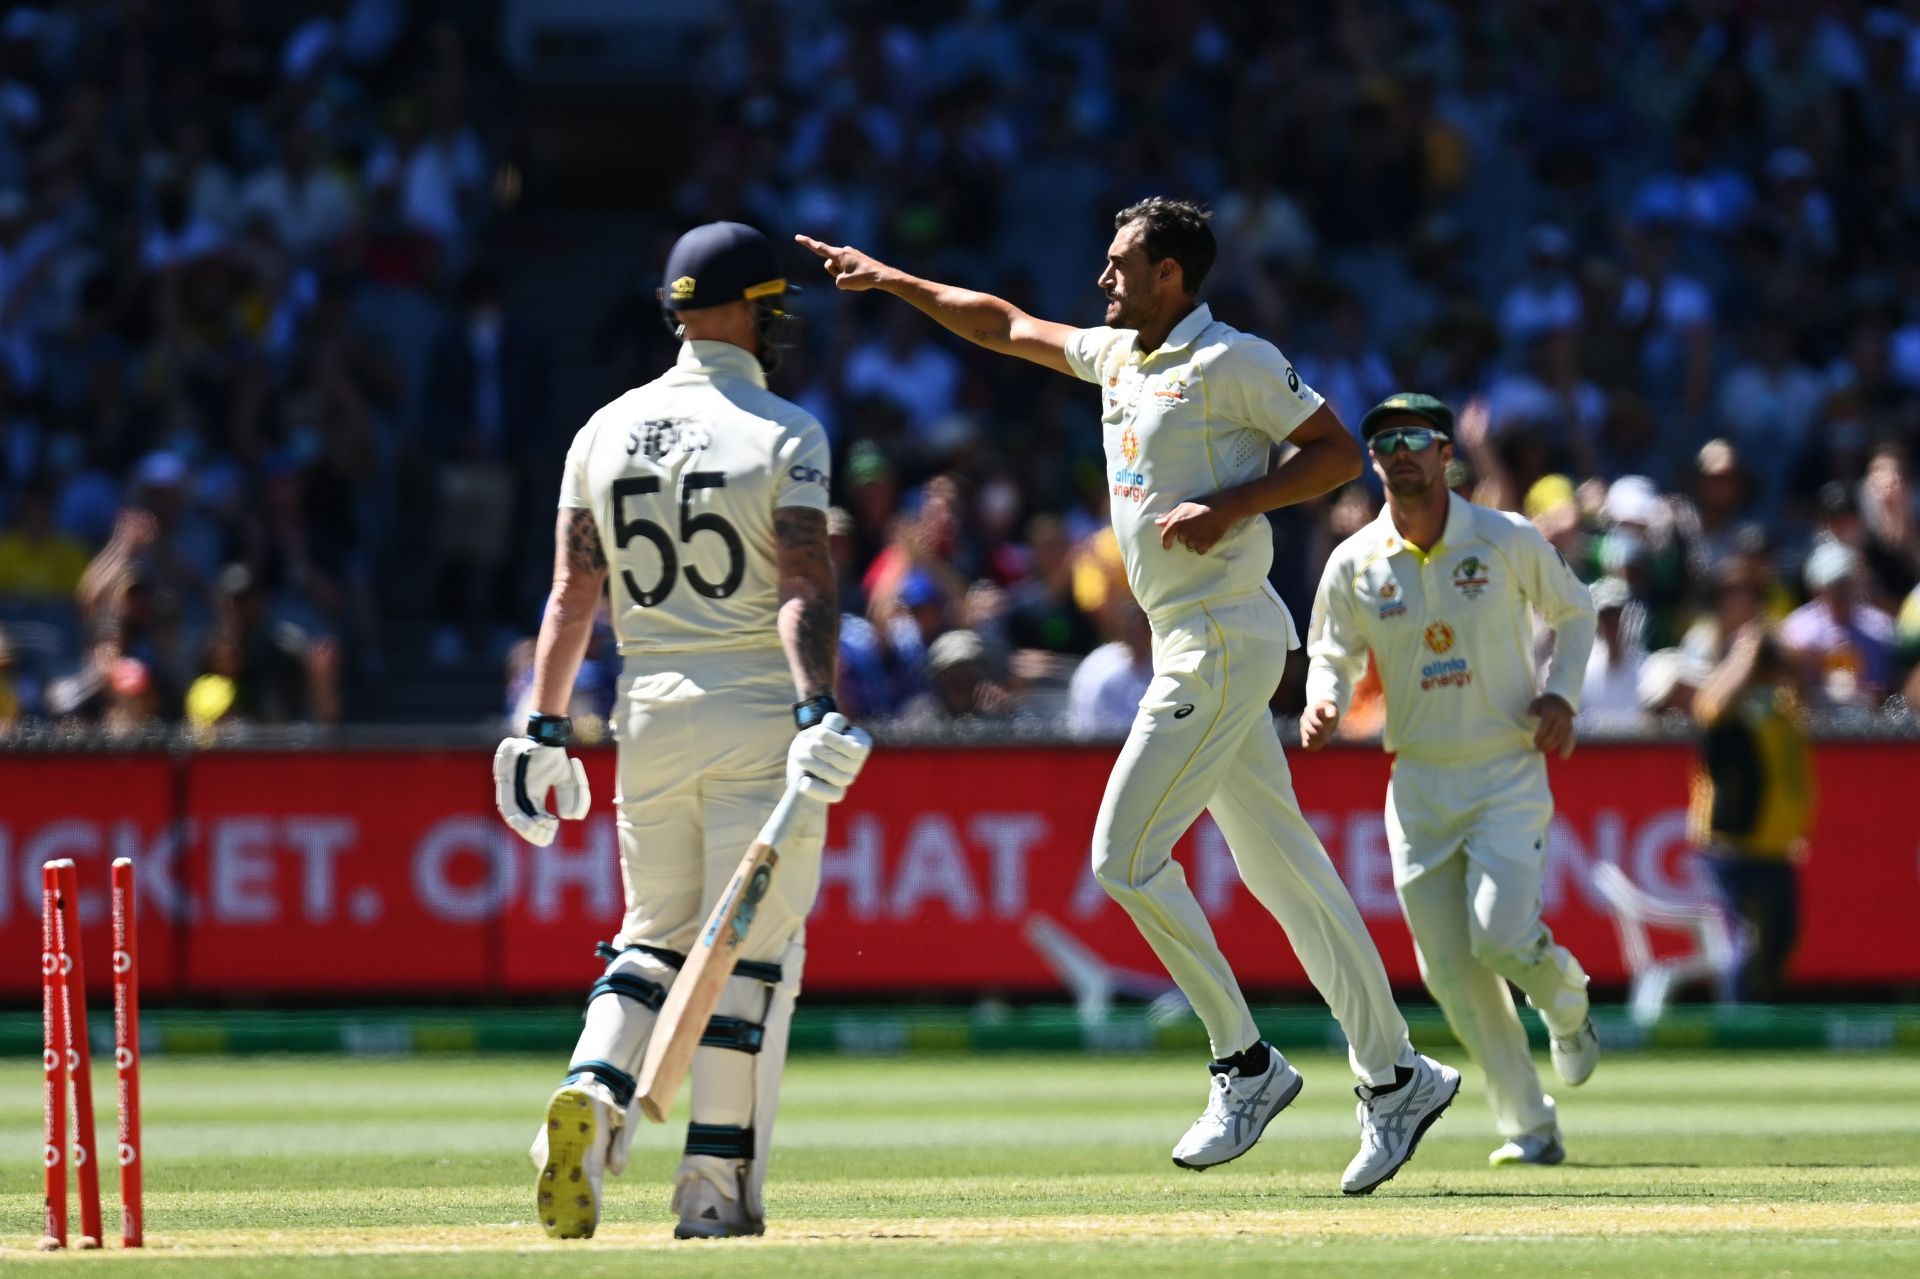 Mitchell Starc celebrates a wicket during the Ashes